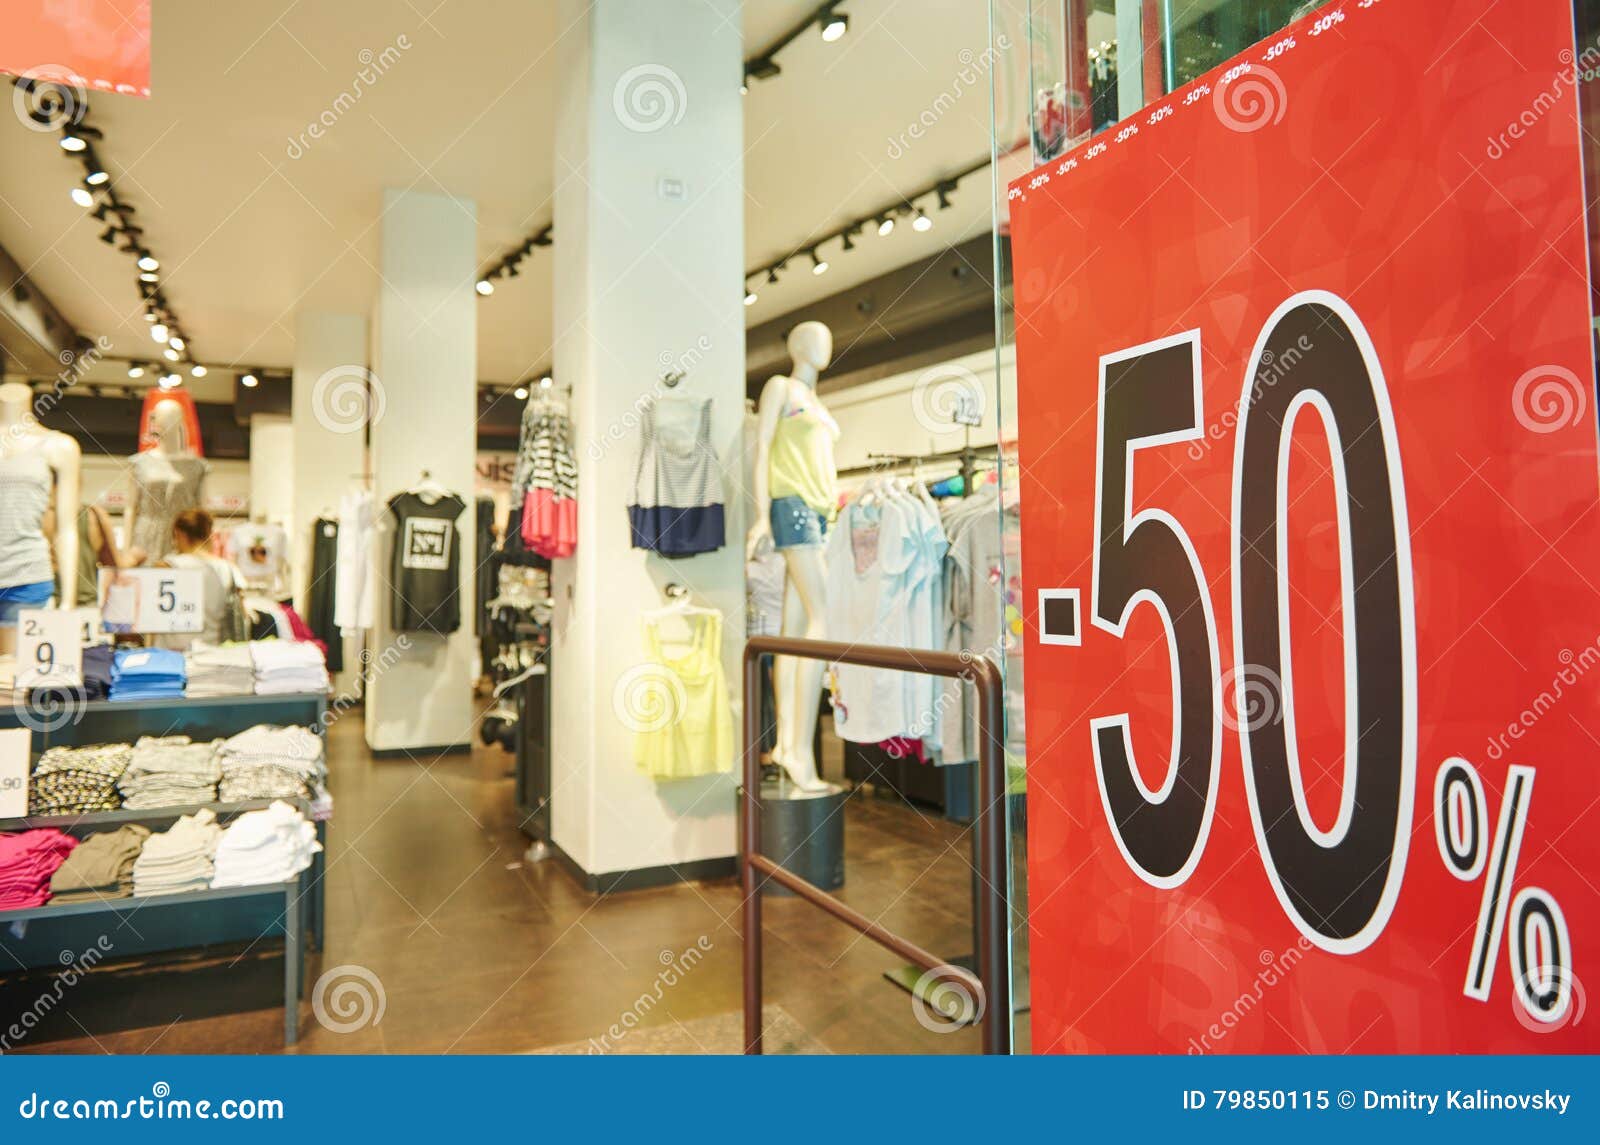 Shopping Sale. Seasonal Half Price Discount On Clothes In Apparel